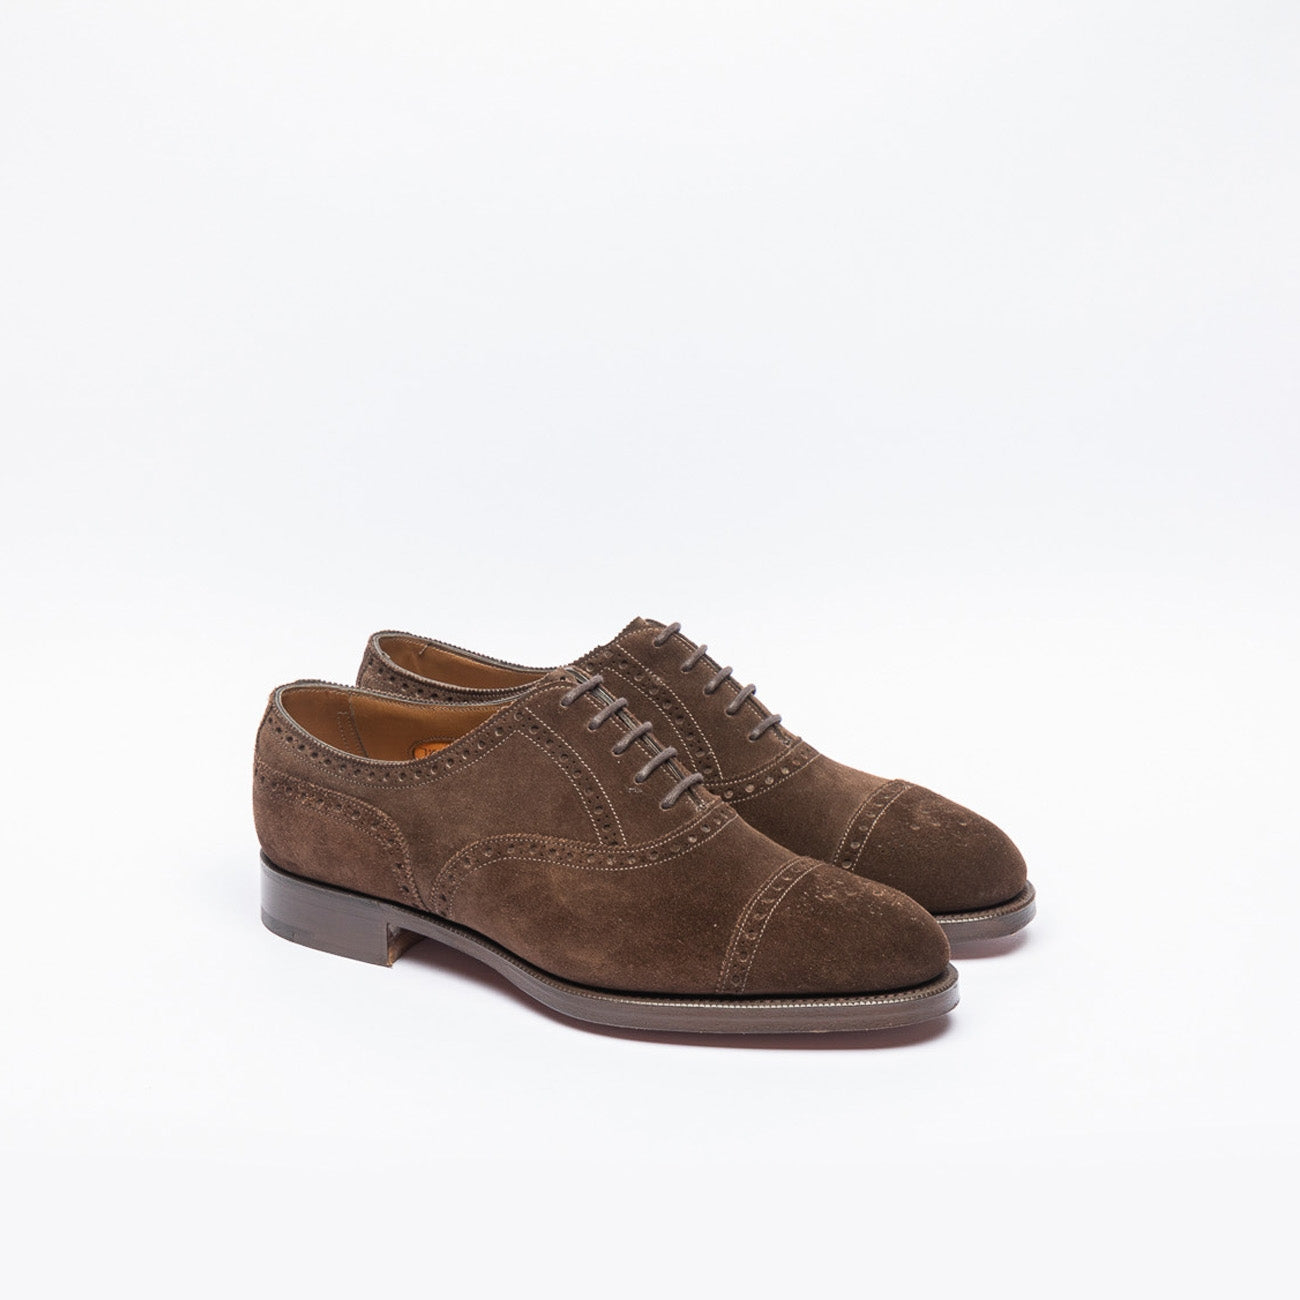 Edward Green Cadogan oxford lace-up in brown suede